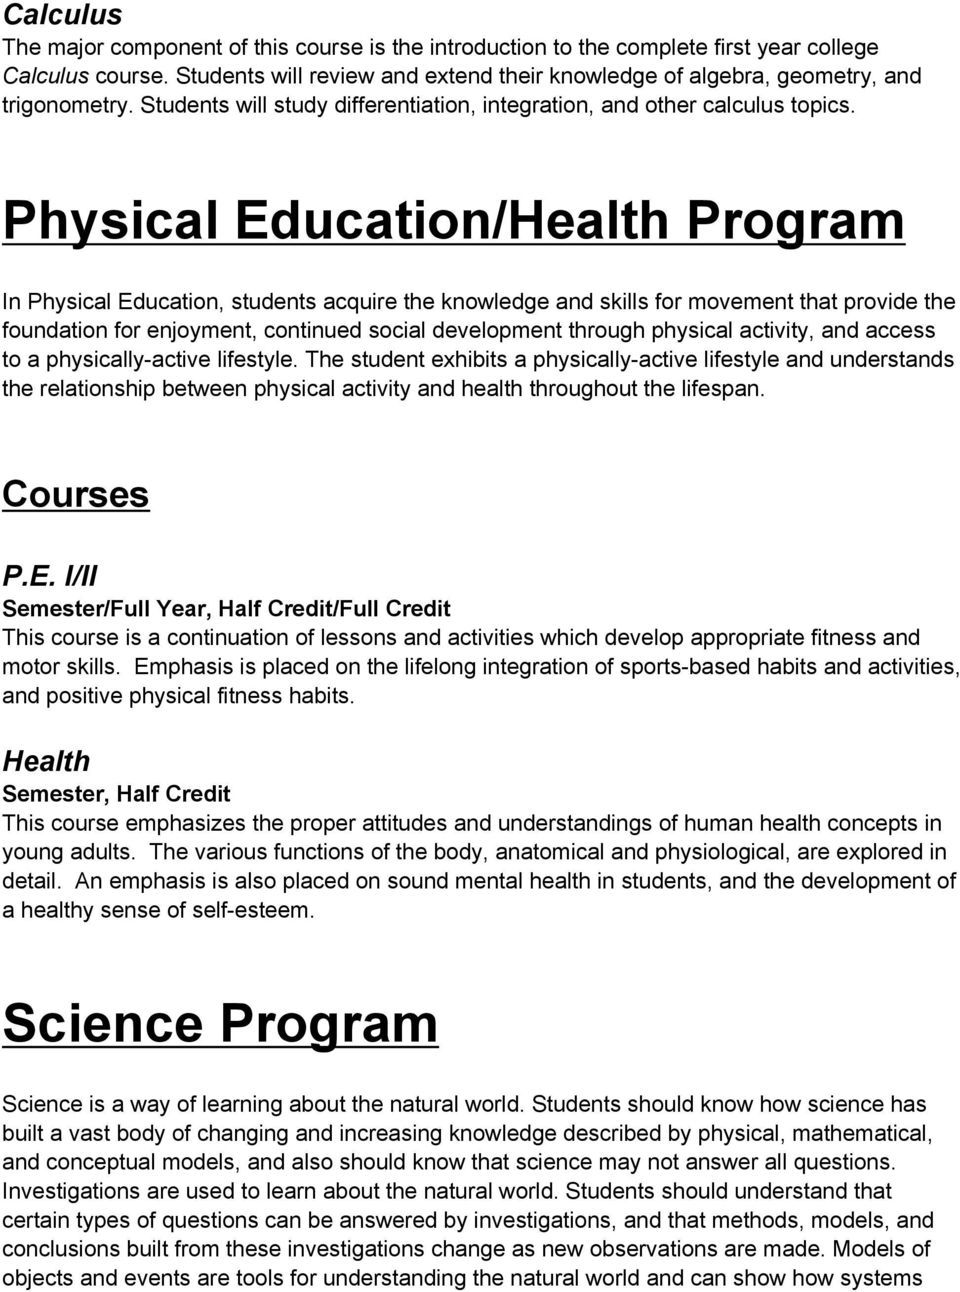 Physical Education/Health Program In Physical Education, students acquire the knowledge and skills for movement that provide the foundation for enjoyment, continued social development through